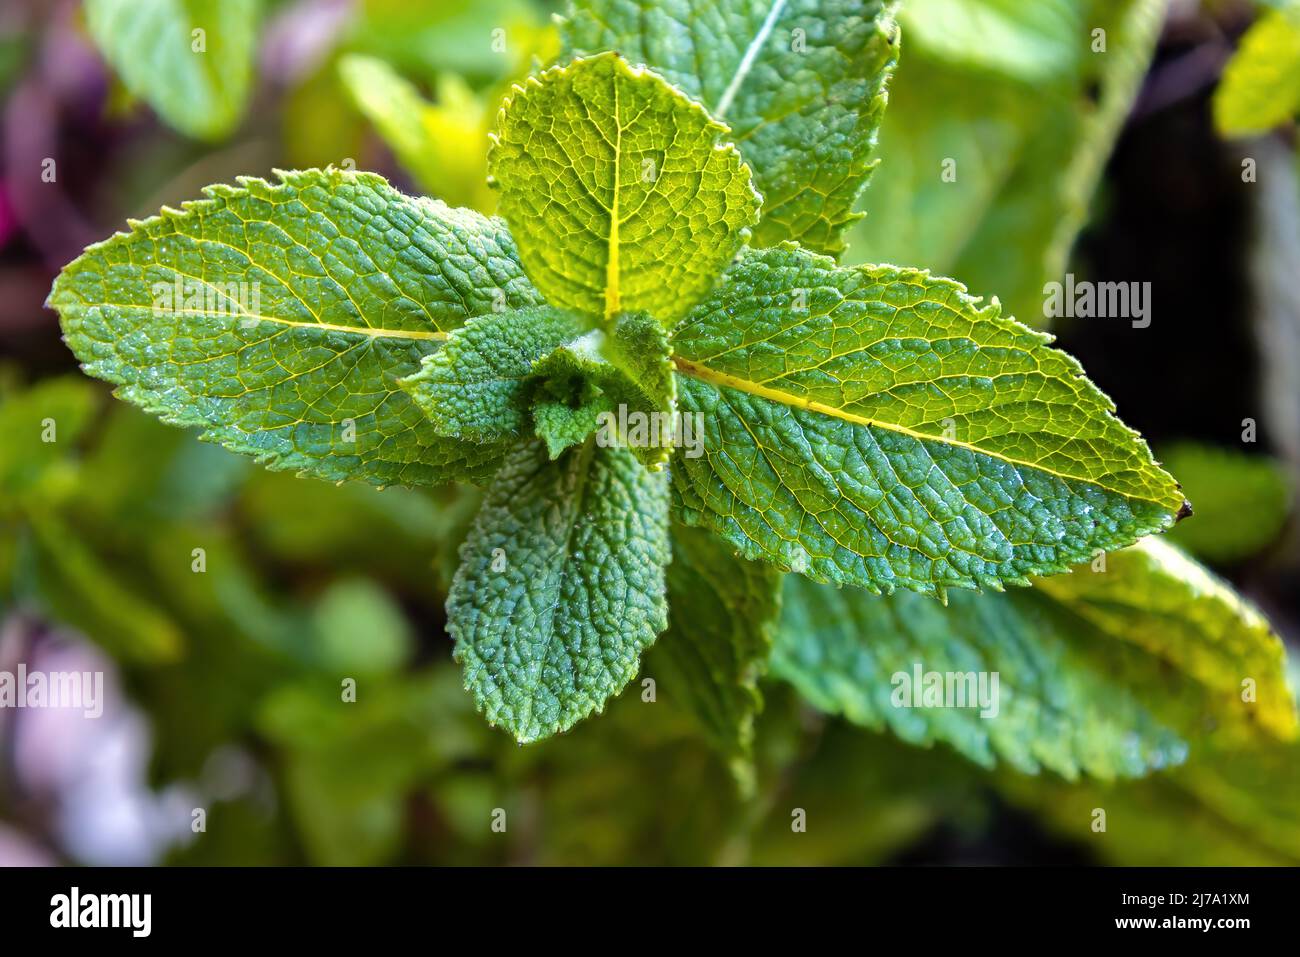 Spearmint, also known as garden mint, common mint, lamb mint and mackerel mint, is a species of mint, Mentha spicata, native to Europe and southern te Stock Photo